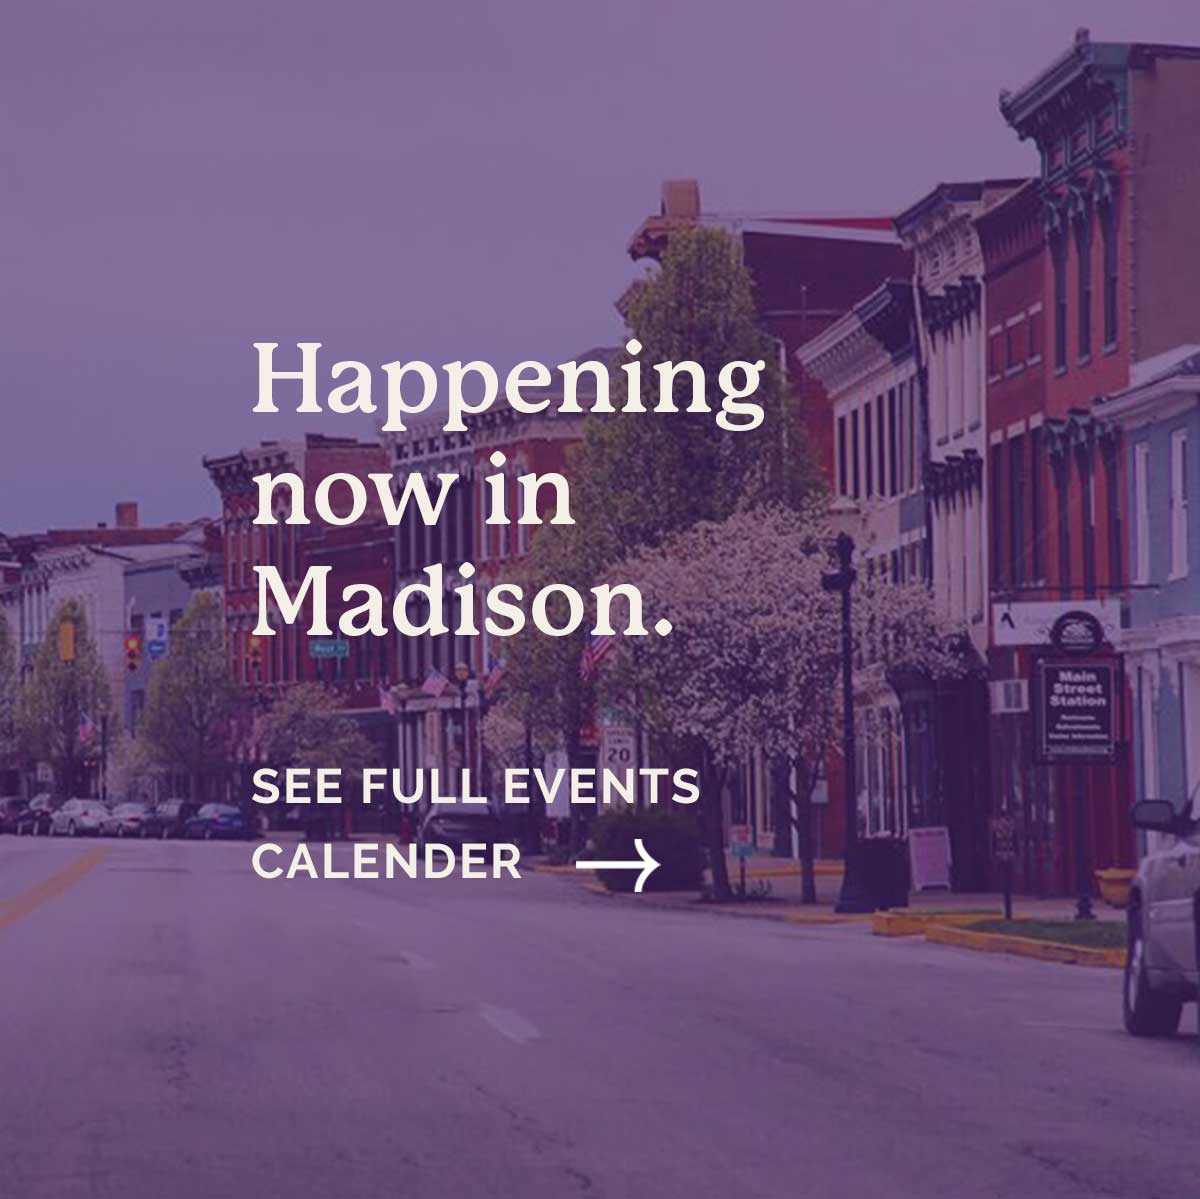 Happening now in Madison. See Full Events Calendar.